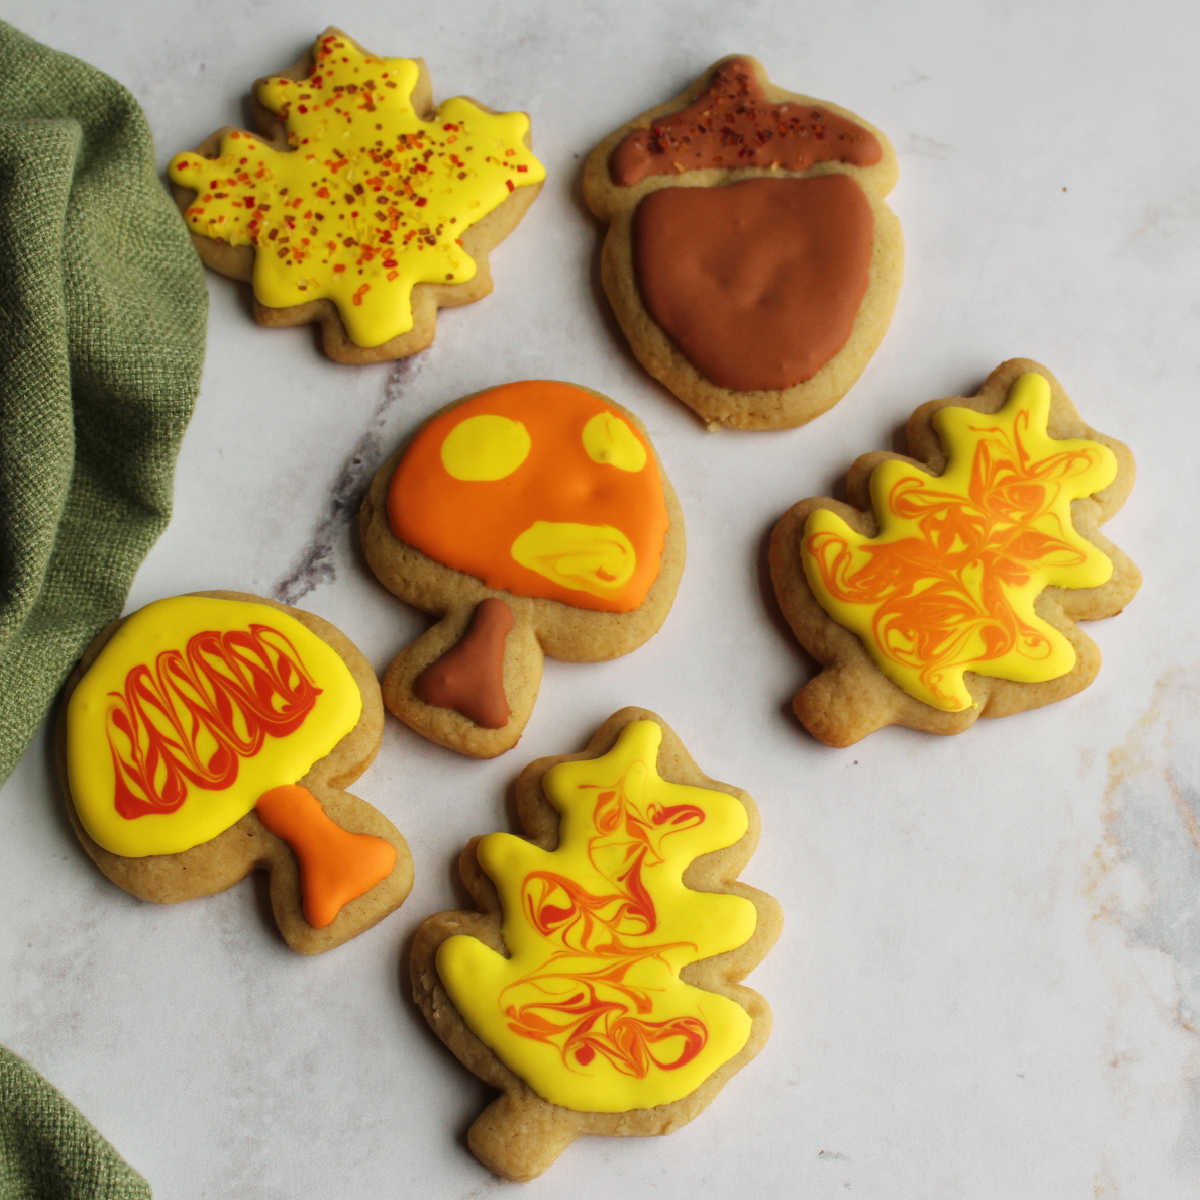 Cinnamon brown sugar cookies cut into leaf, mushroom and acorn shapes and decorated with royal icing.